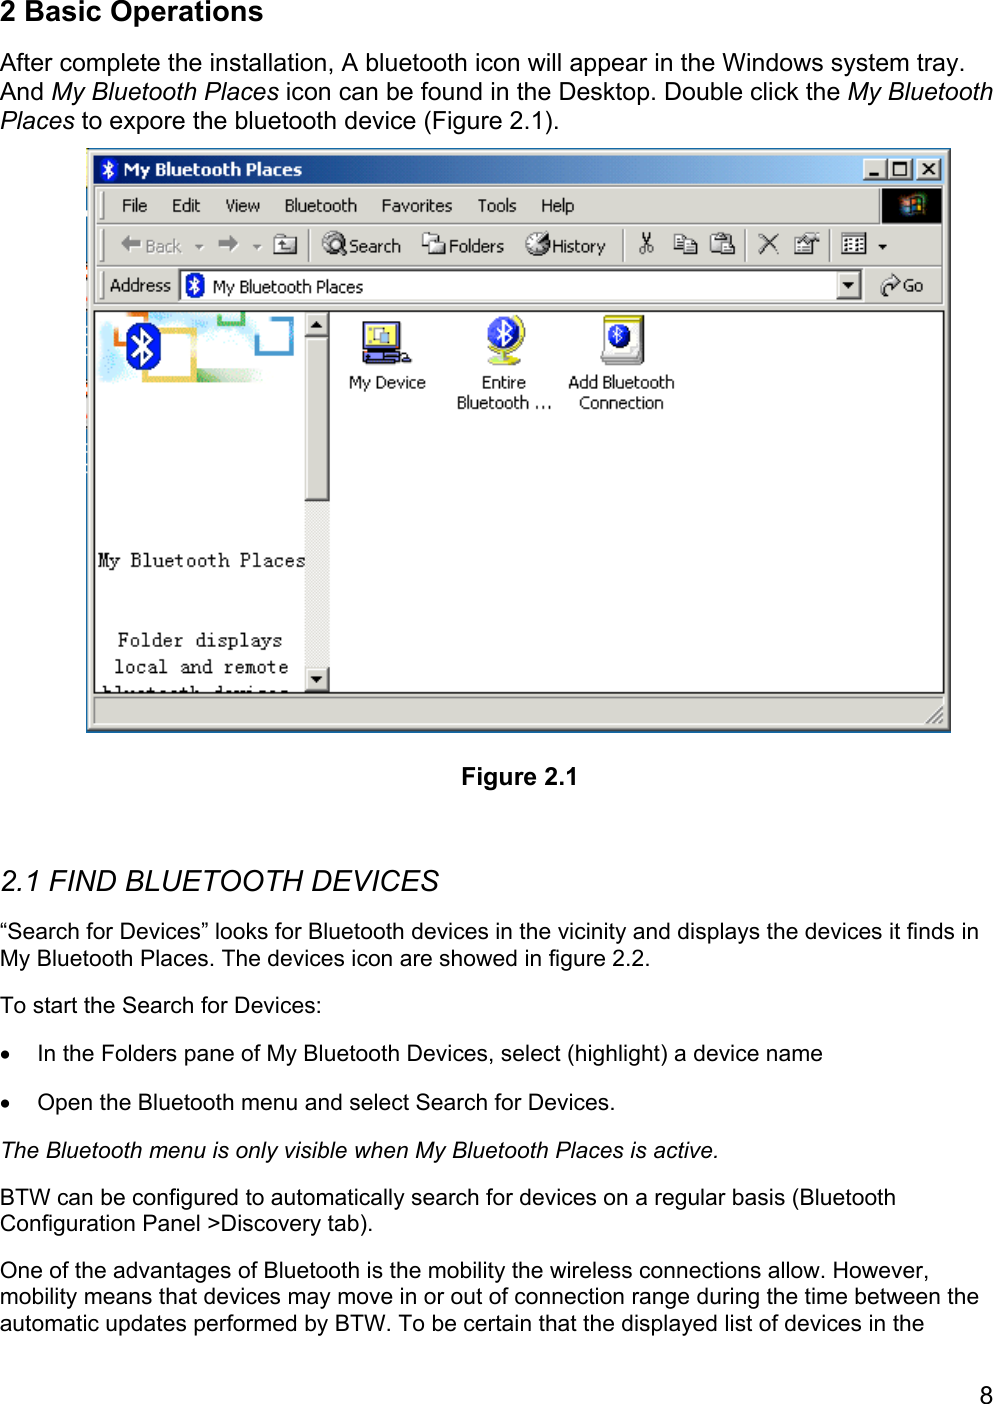 82 Basic OperationsAfter complete the installation, A bluetooth icon will appear in the Windows system tray.And My Bluetooth Places icon can be found in the Desktop. Double click the My BluetoothPlaces to expore the bluetooth device (Figure 2.1).2.1 FIND BLUETOOTH DEVICES“Search for Devices” looks for Bluetooth devices in the vicinity and displays the devices it finds inMy Bluetooth Places. The devices icon are showed in figure 2.2.To start the Search for Devices:•  In the Folders pane of My Bluetooth Devices, select (highlight) a device name•  Open the Bluetooth menu and select Search for Devices.The Bluetooth menu is only visible when My Bluetooth Places is active.BTW can be configured to automatically search for devices on a regular basis (BluetoothConfiguration Panel &gt;Discovery tab).One of the advantages of Bluetooth is the mobility the wireless connections allow. However,mobility means that devices may move in or out of connection range during the time between theautomatic updates performed by BTW. To be certain that the displayed list of devices in theFigure 2.1